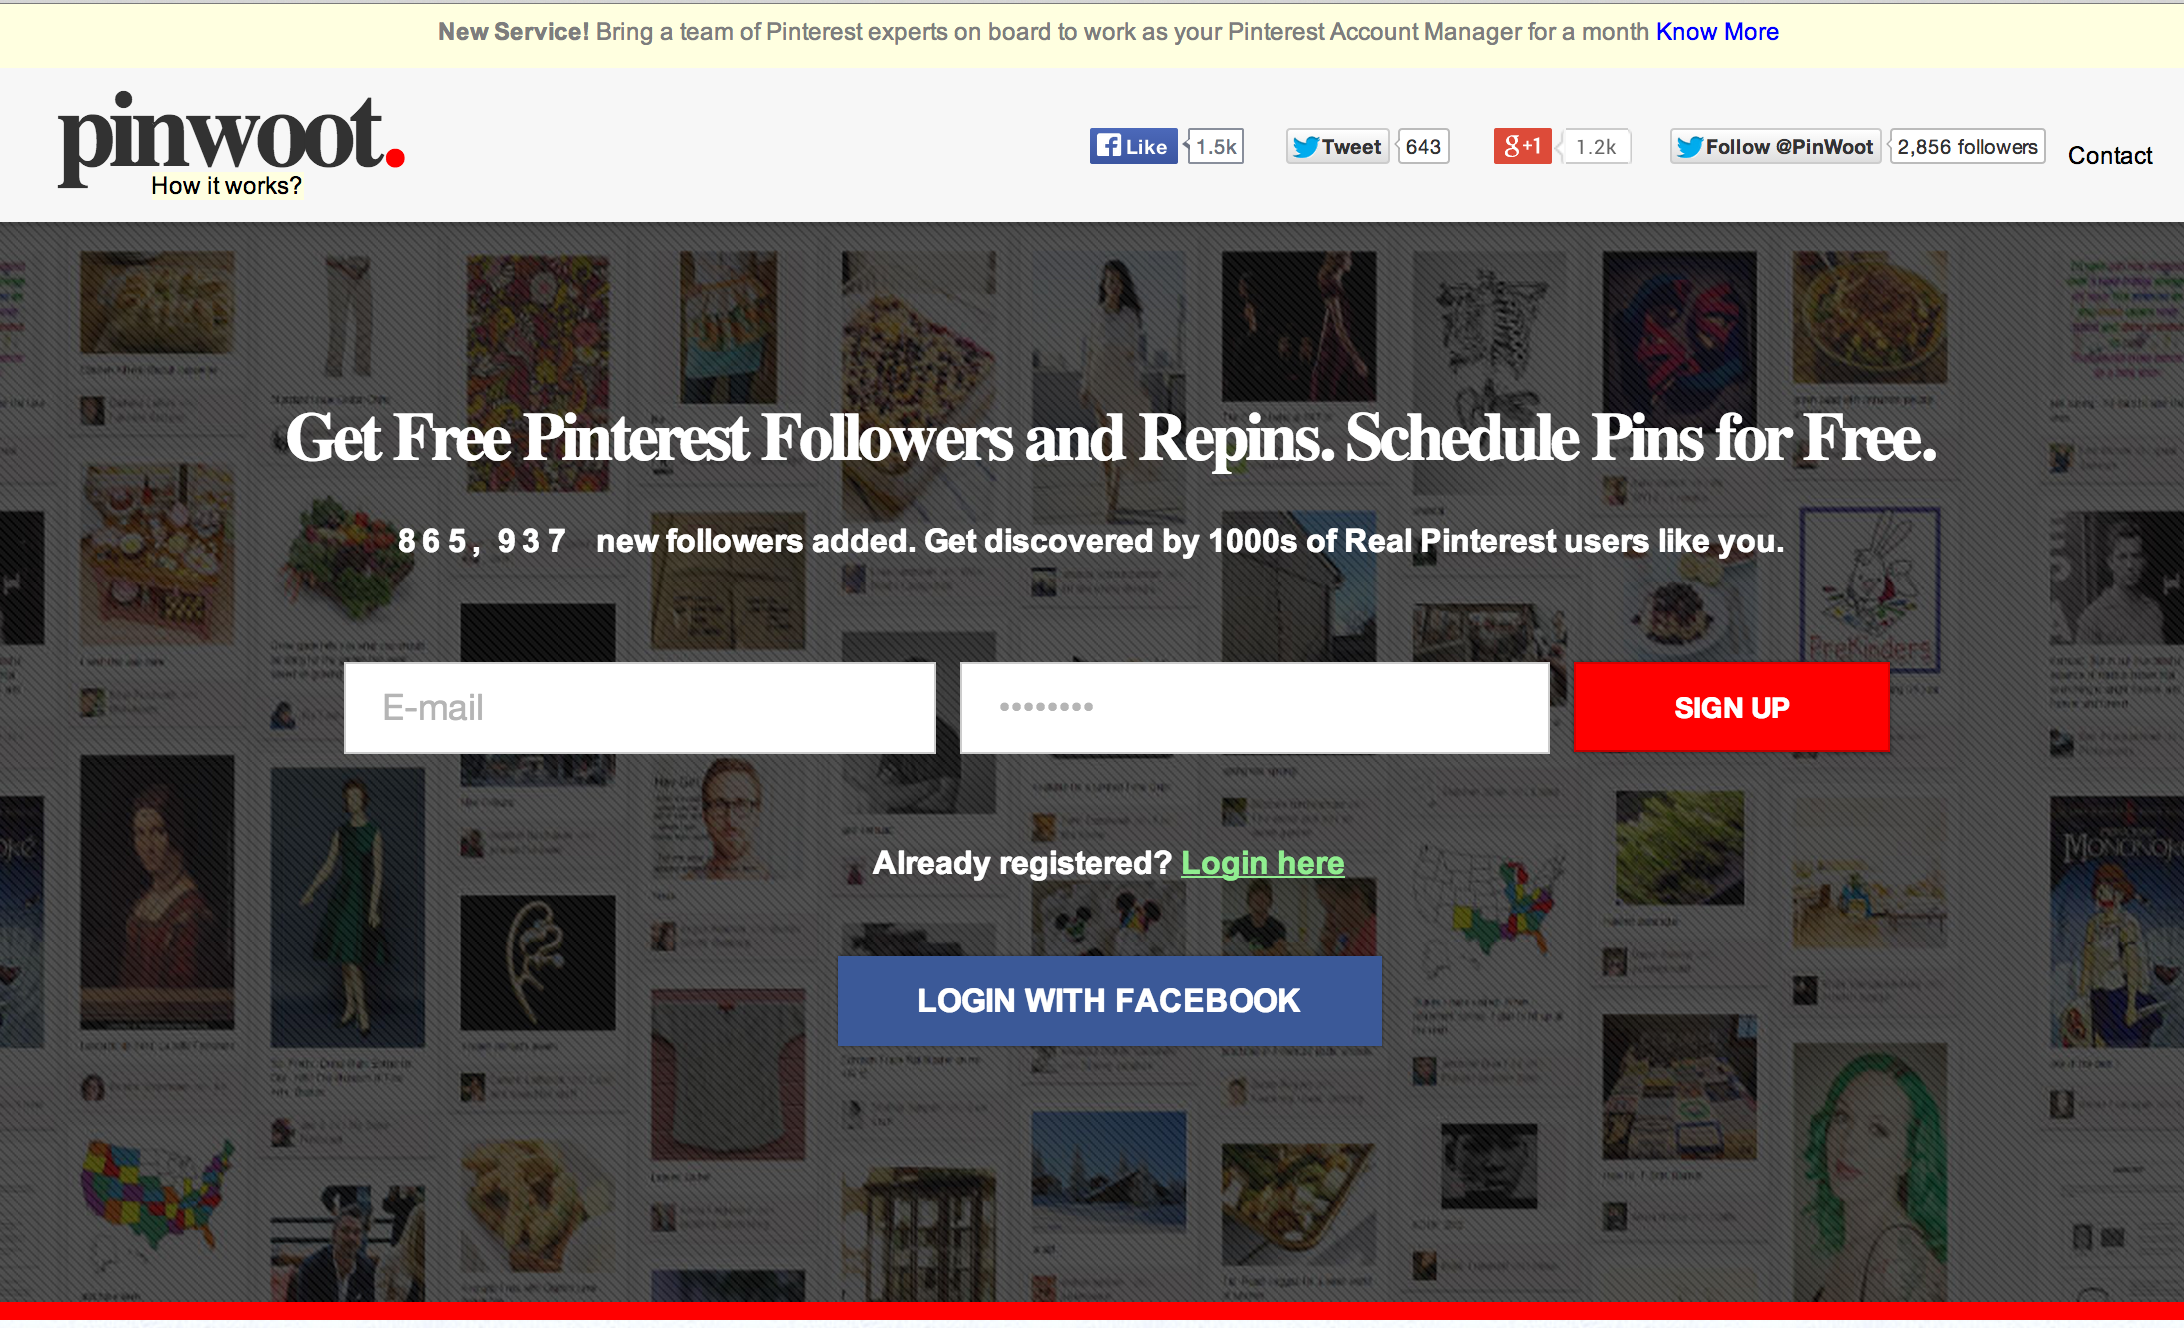 Get Free Pinterest Followers and Repins. Schedule Pins for Free.